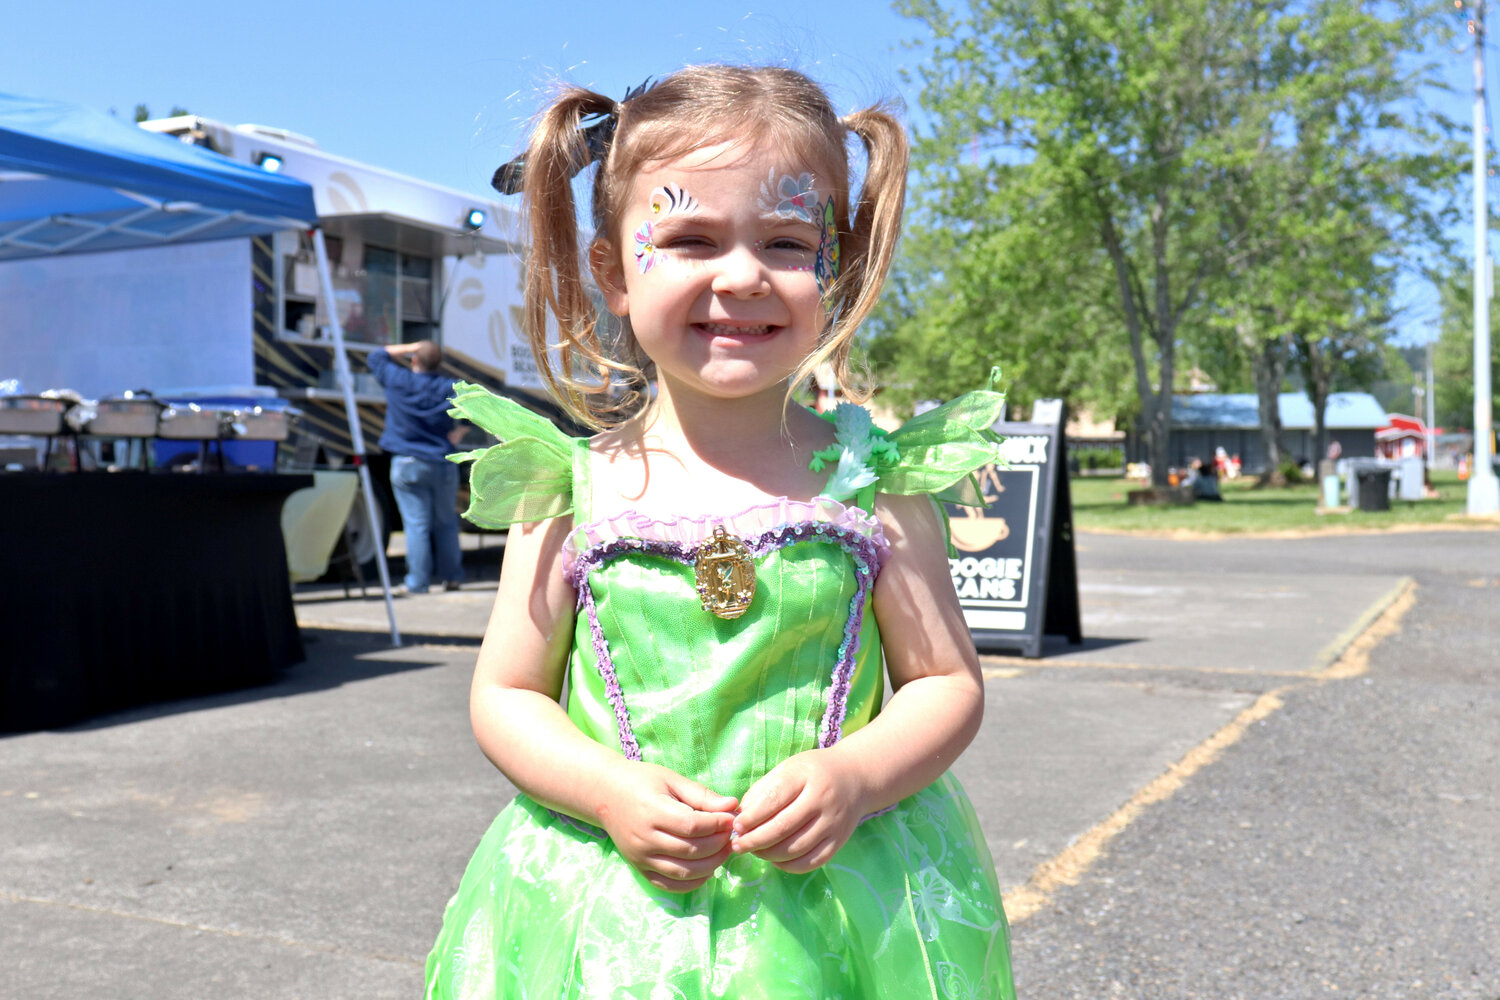 Adaline, 3, smiles for a photo on Saturday, May 27 during the Centralia Fantasy Festival at the Southwest Washington Fairgrounds in Chehalis.